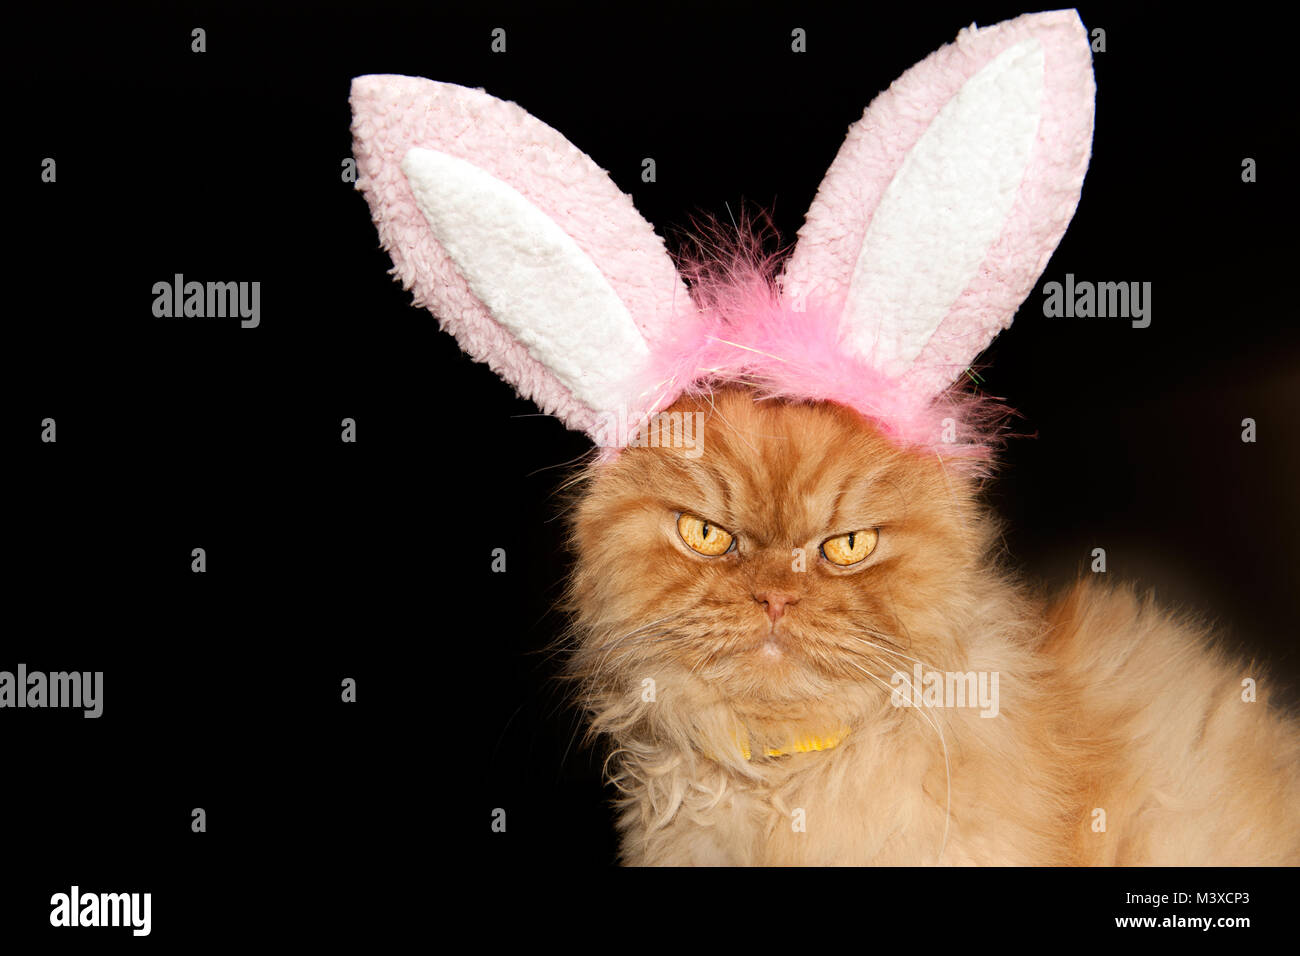 Close up portrait of orange Persian cat with bunny ears Stock Photo